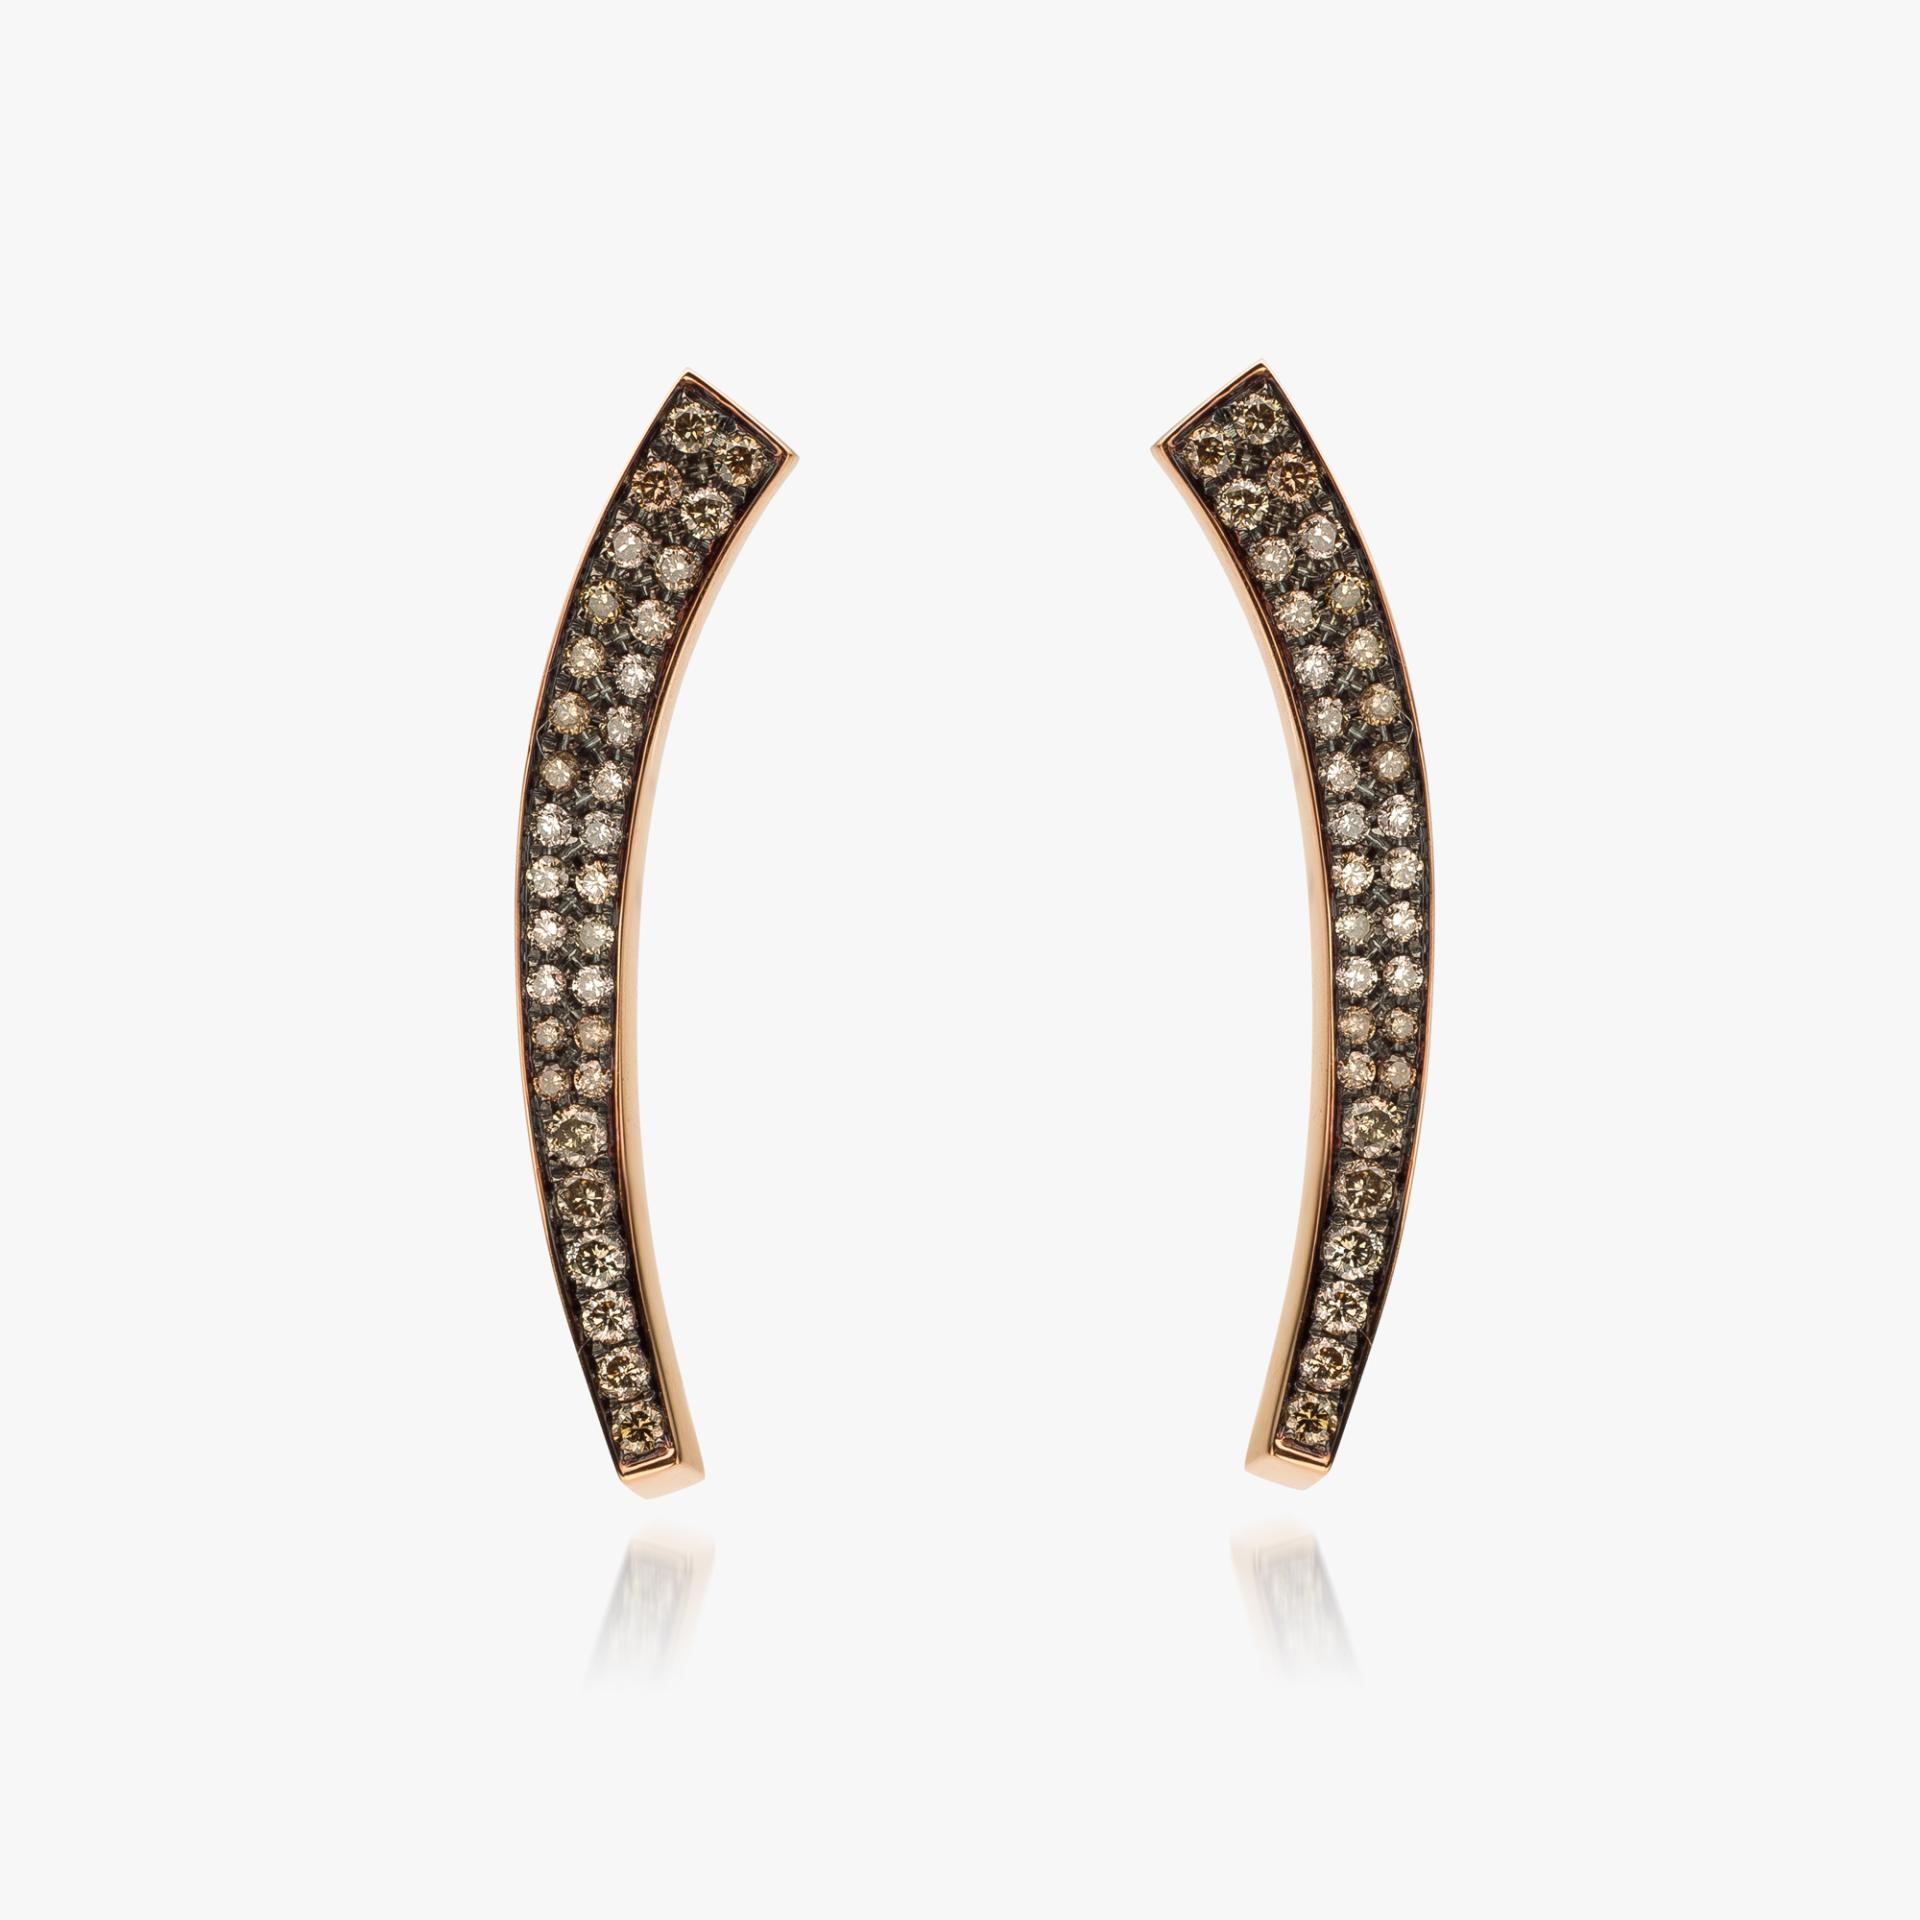 Assymetrical rose gold earrings set with diamonds made by Maison De Greef